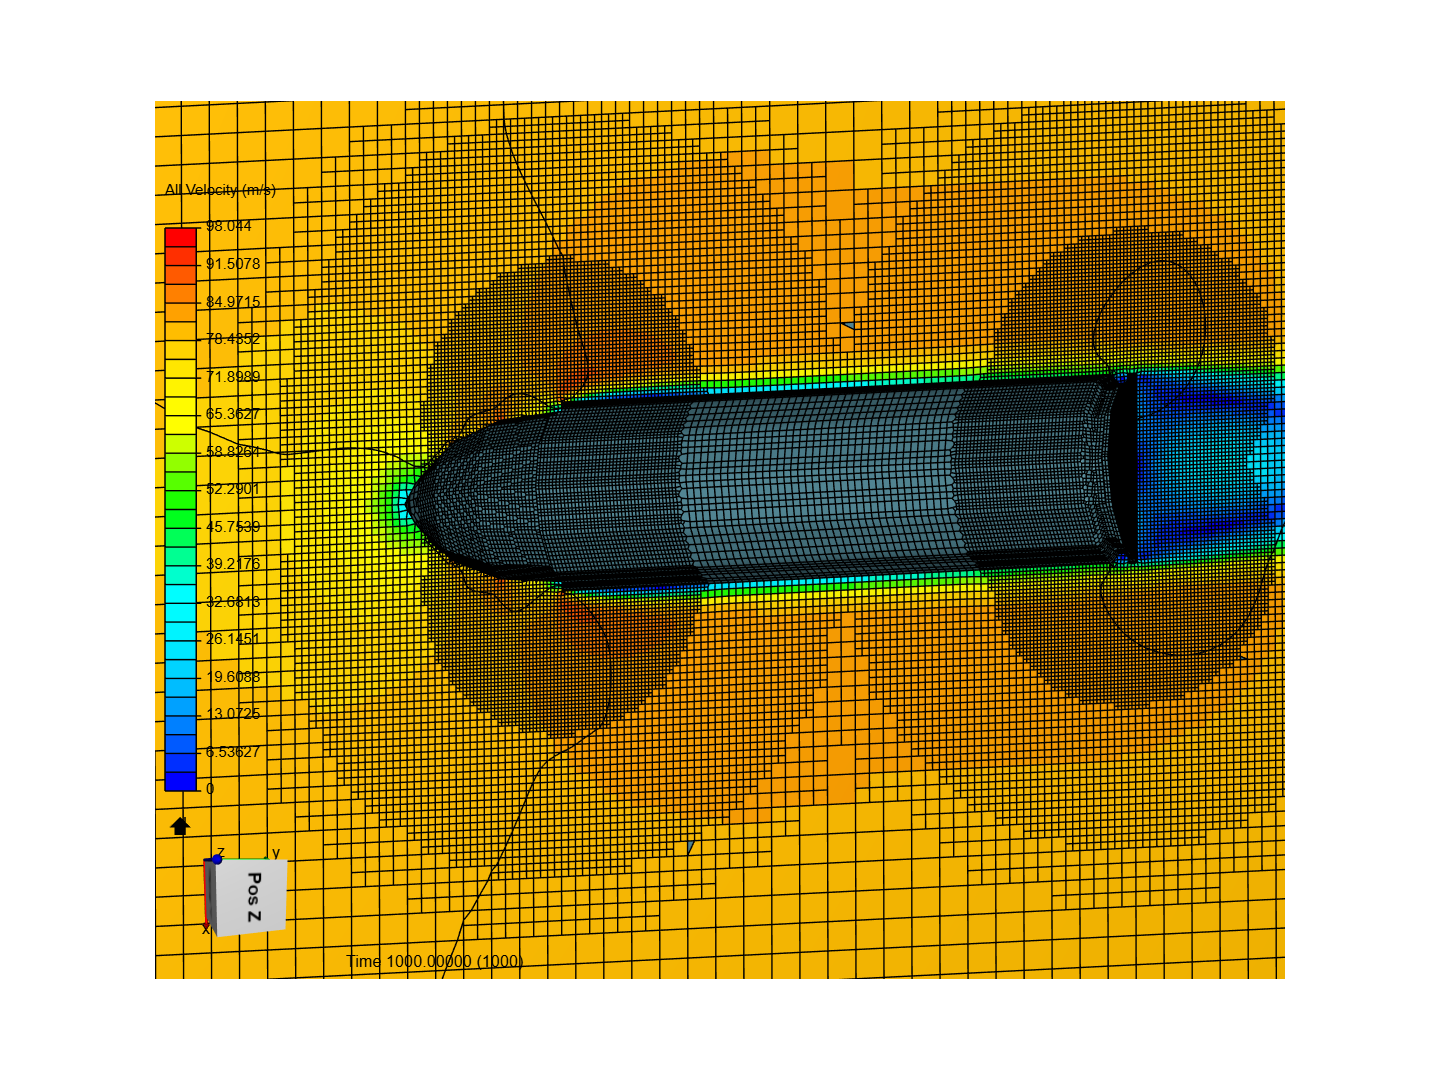 cfd for bullet image